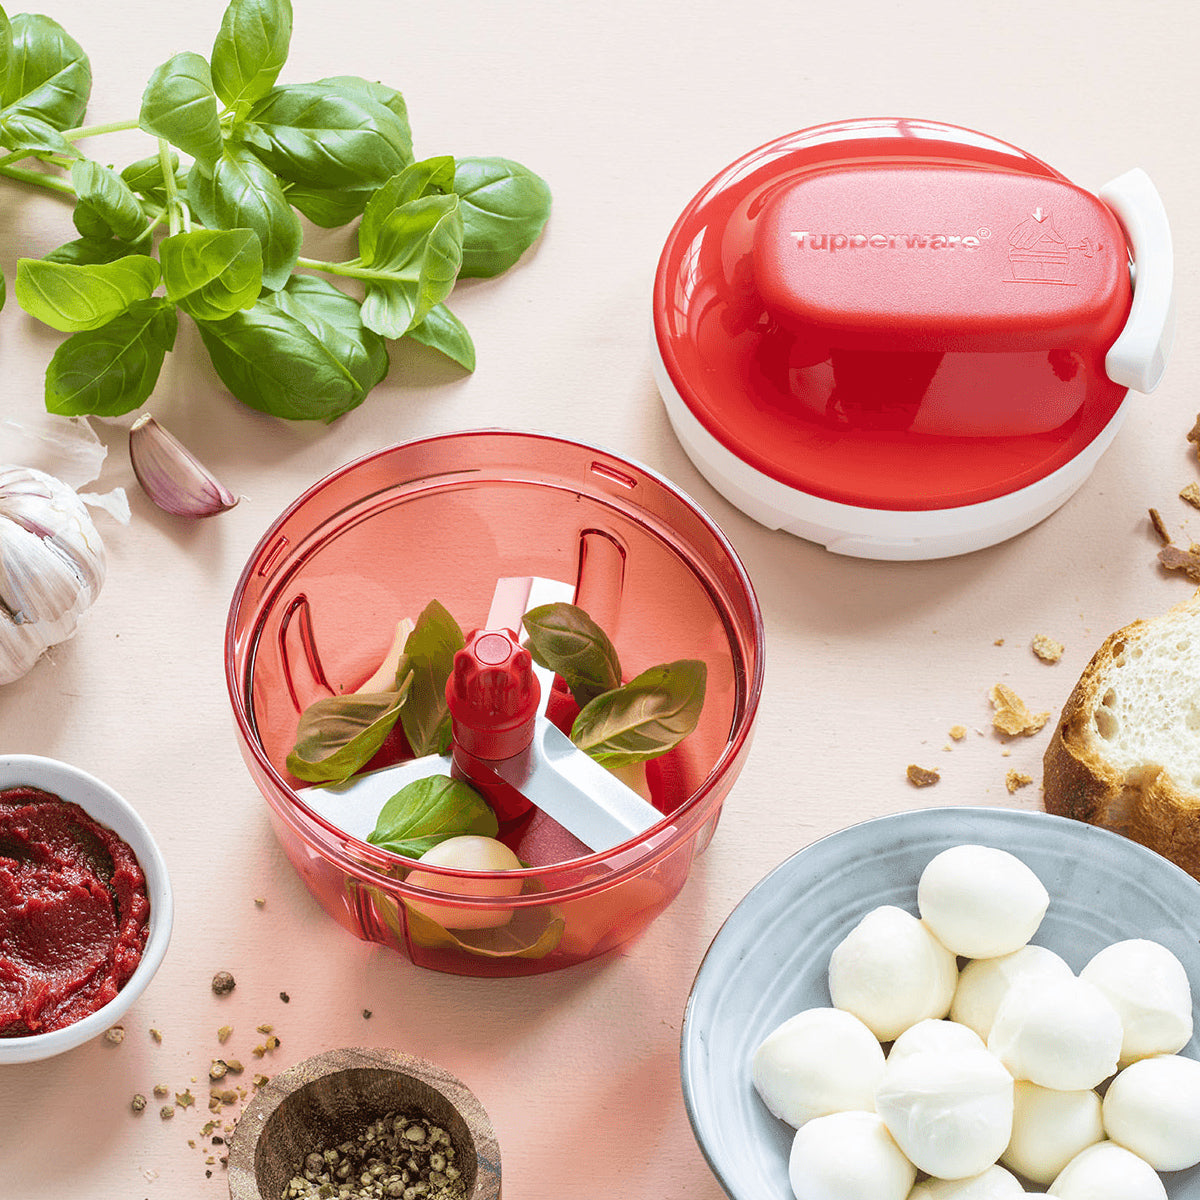 Tupperware Nordic - Take out your red and white SuperSonic Chopper